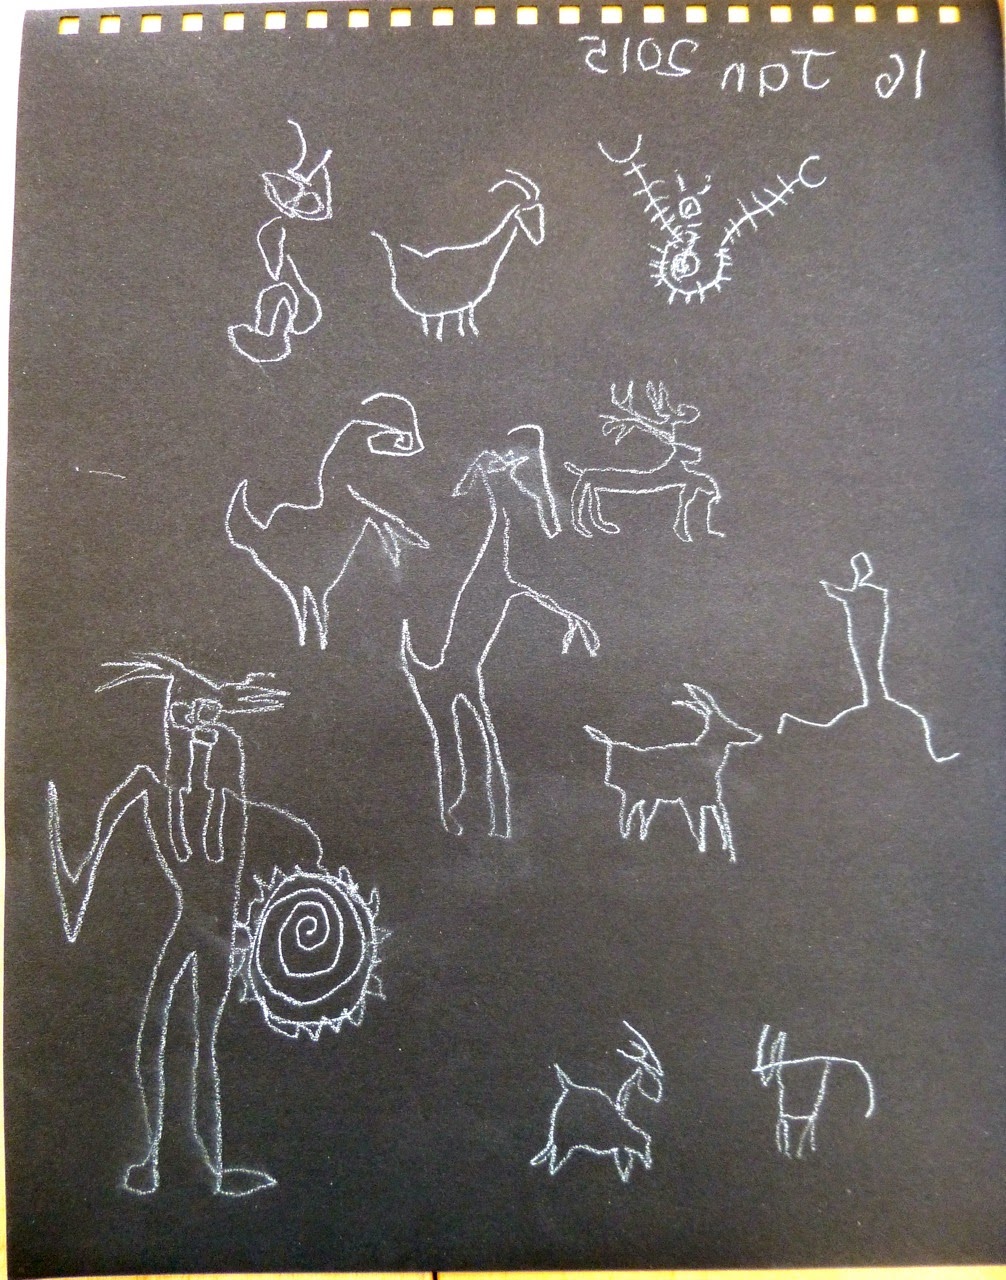 Rock art white on black drawn with left hand whilst drawing...